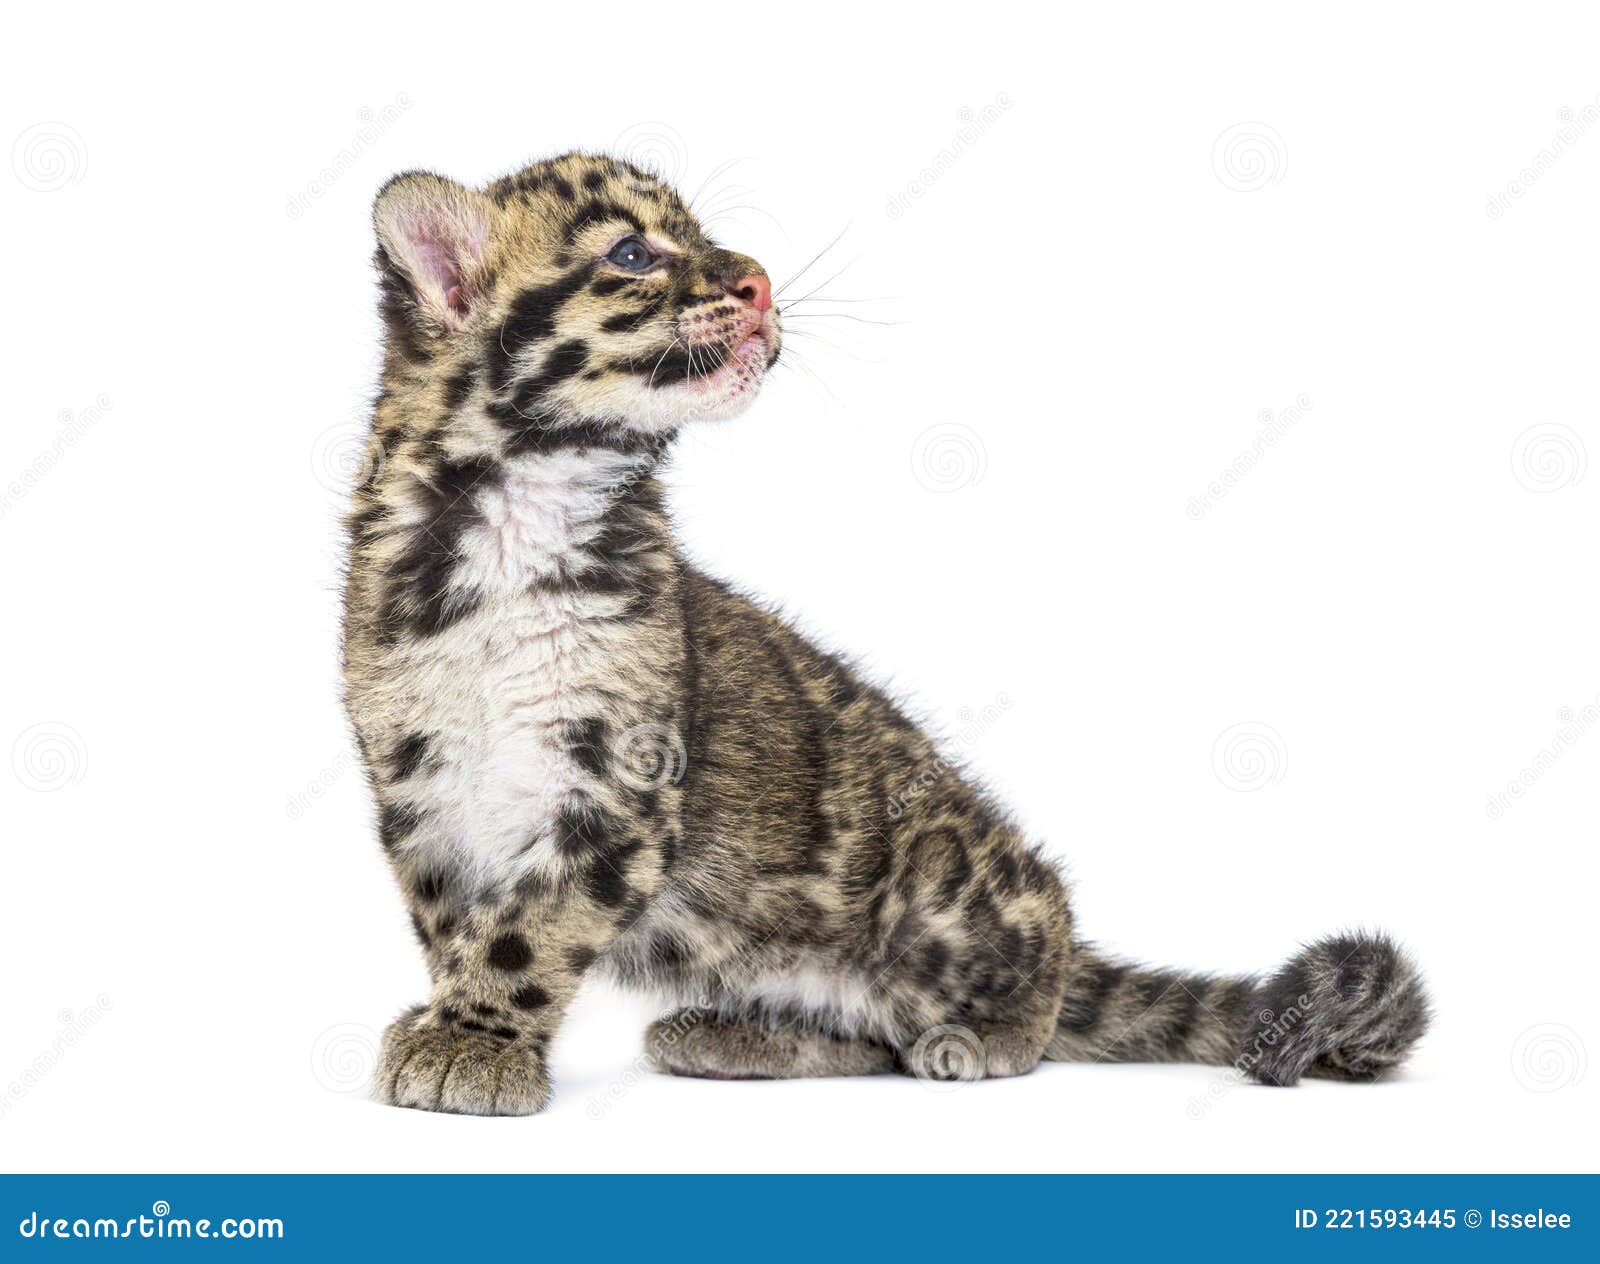 clouded leopard cub, two months old, neofelis nebulosa